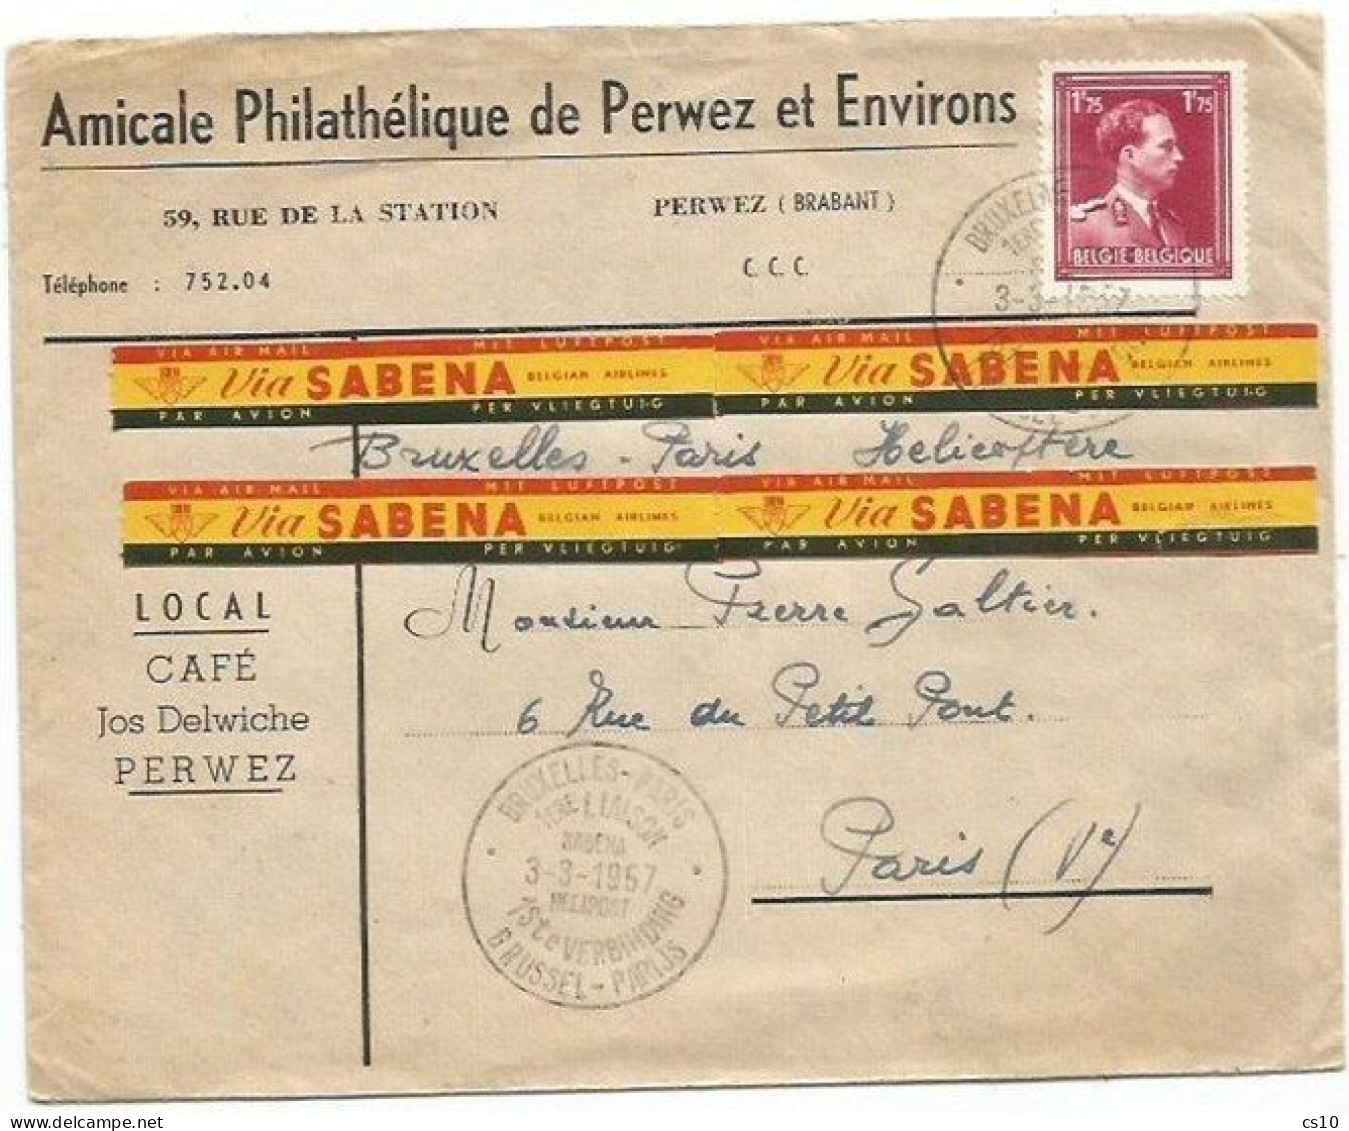 SABENA Airlines Labels Cv 3mar1957 By HELIPOST With FB1.75 Bruxelles X Paris - Other (Air)